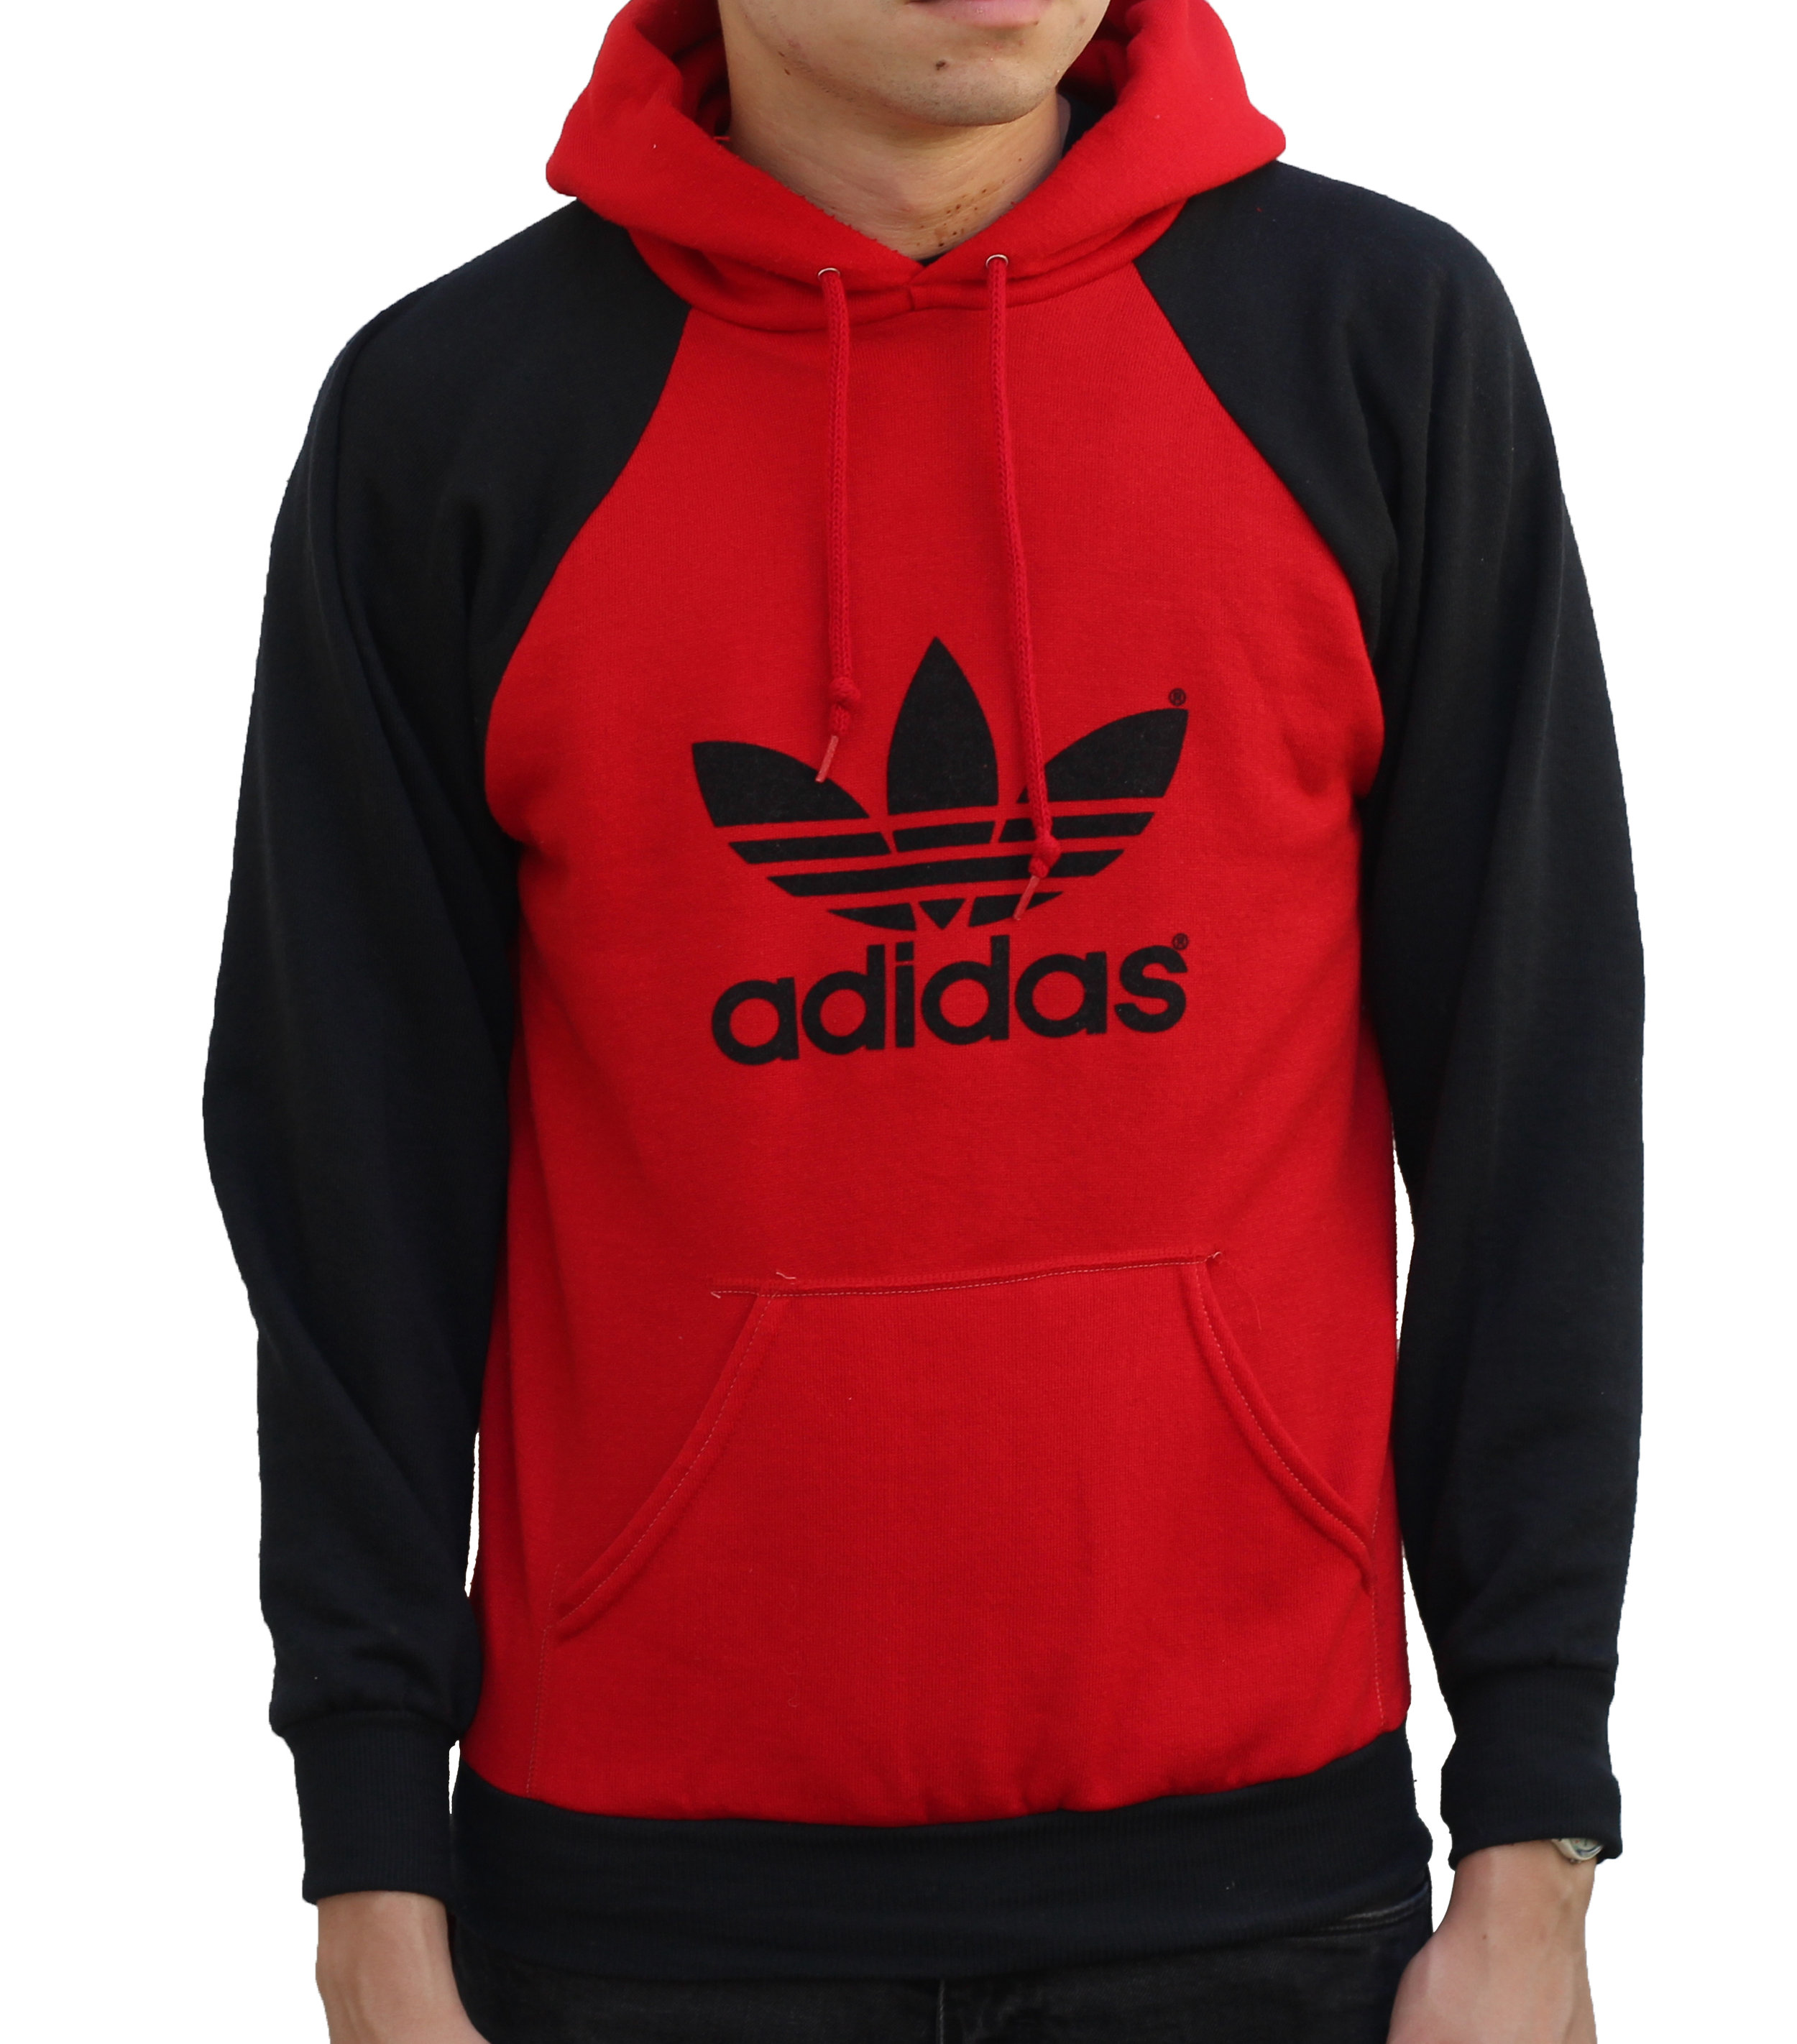 black and red adidas jumper